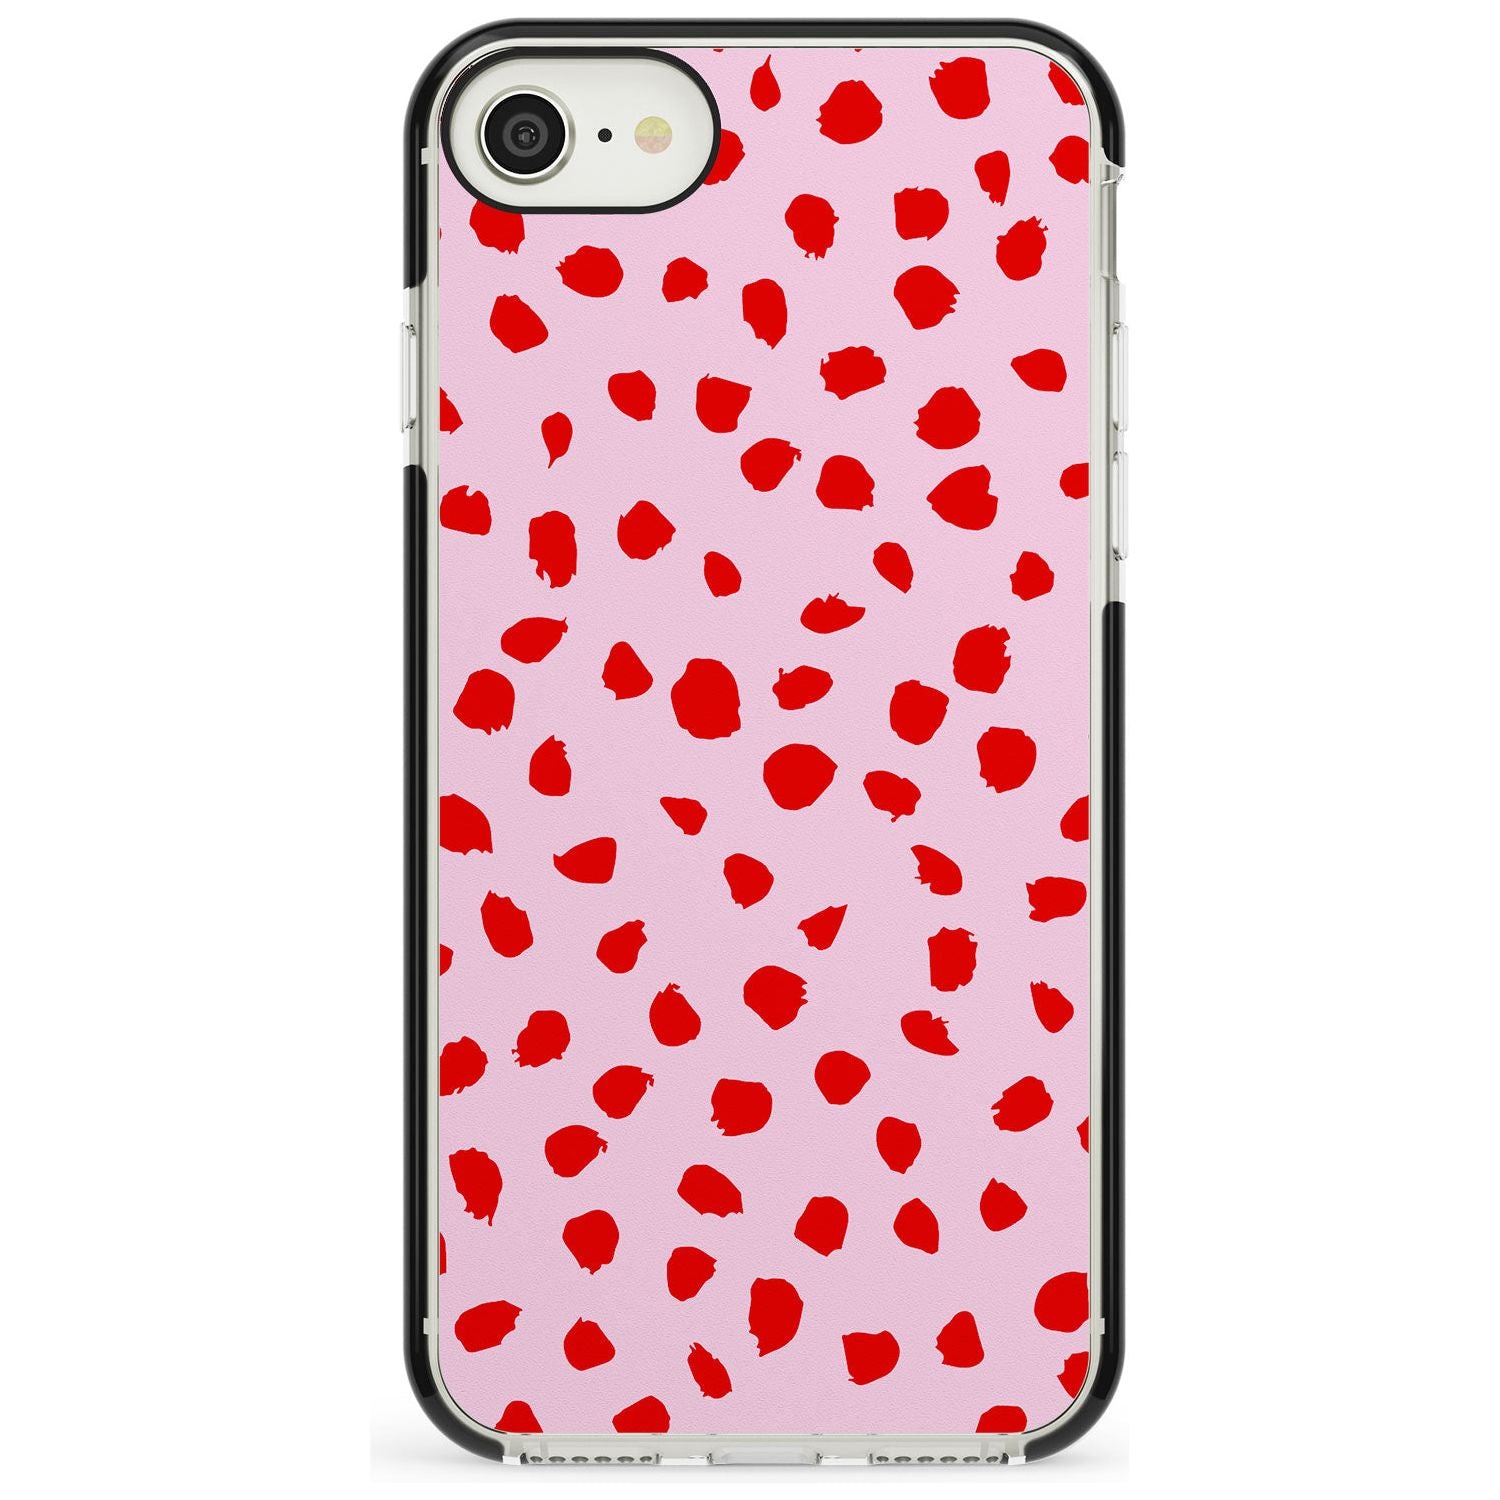 Red on Pink Dalmatian Polka Dot Spots Black Impact Phone Case for iPhone SE 8 7 Plus